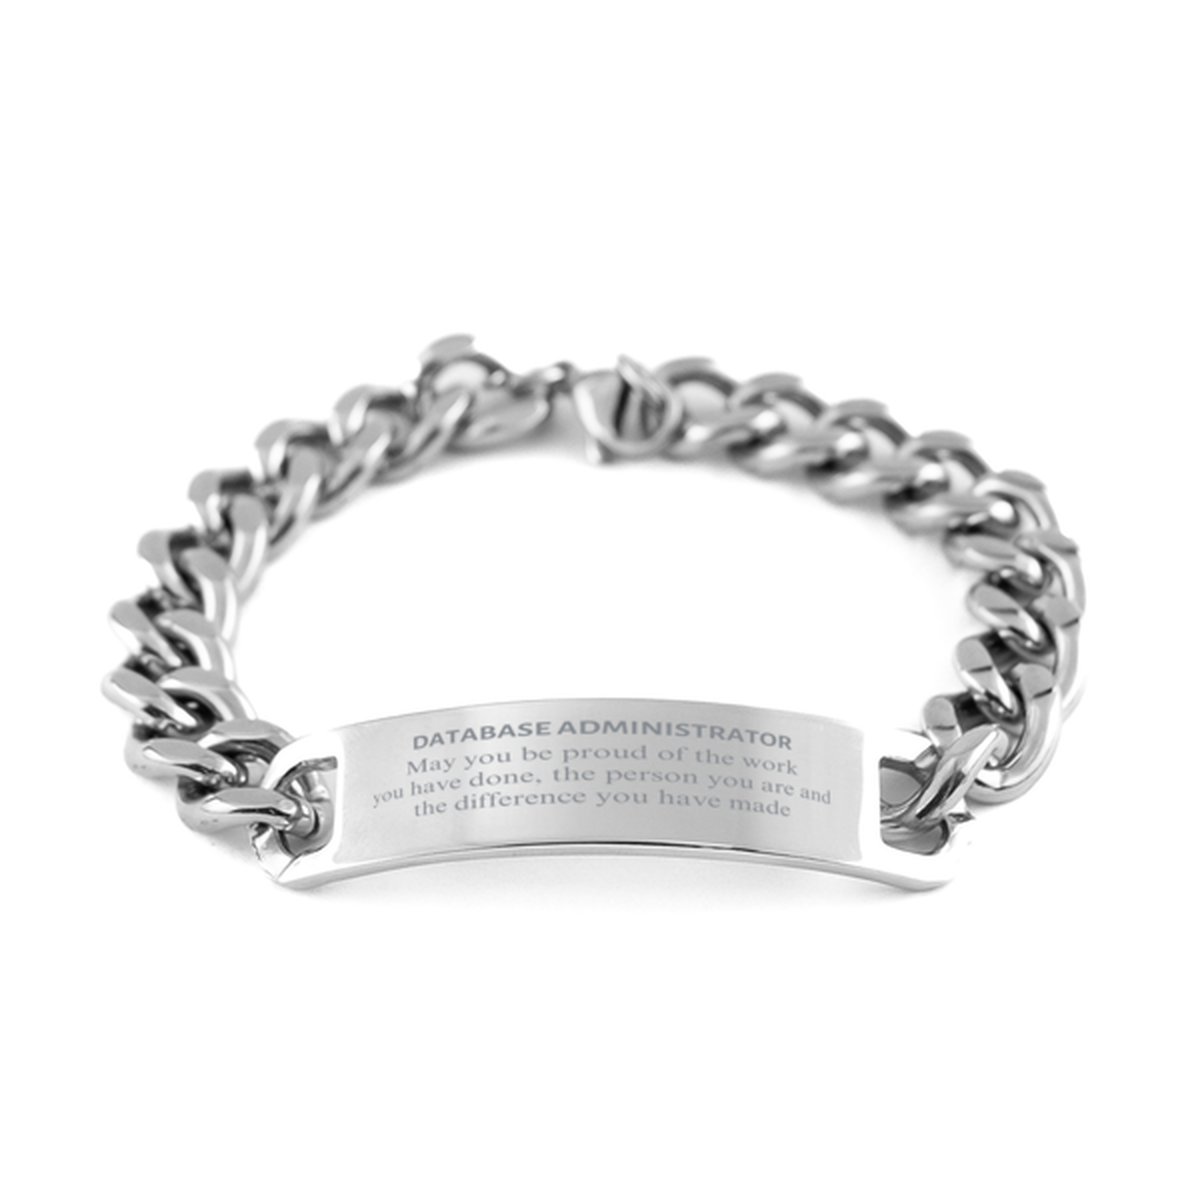 Database Administrator May you be proud of the work you have done, Retirement Database Administrator Cuban Chain Stainless Steel Bracelet for Colleague Appreciation Gifts Amazing for Database Administrator